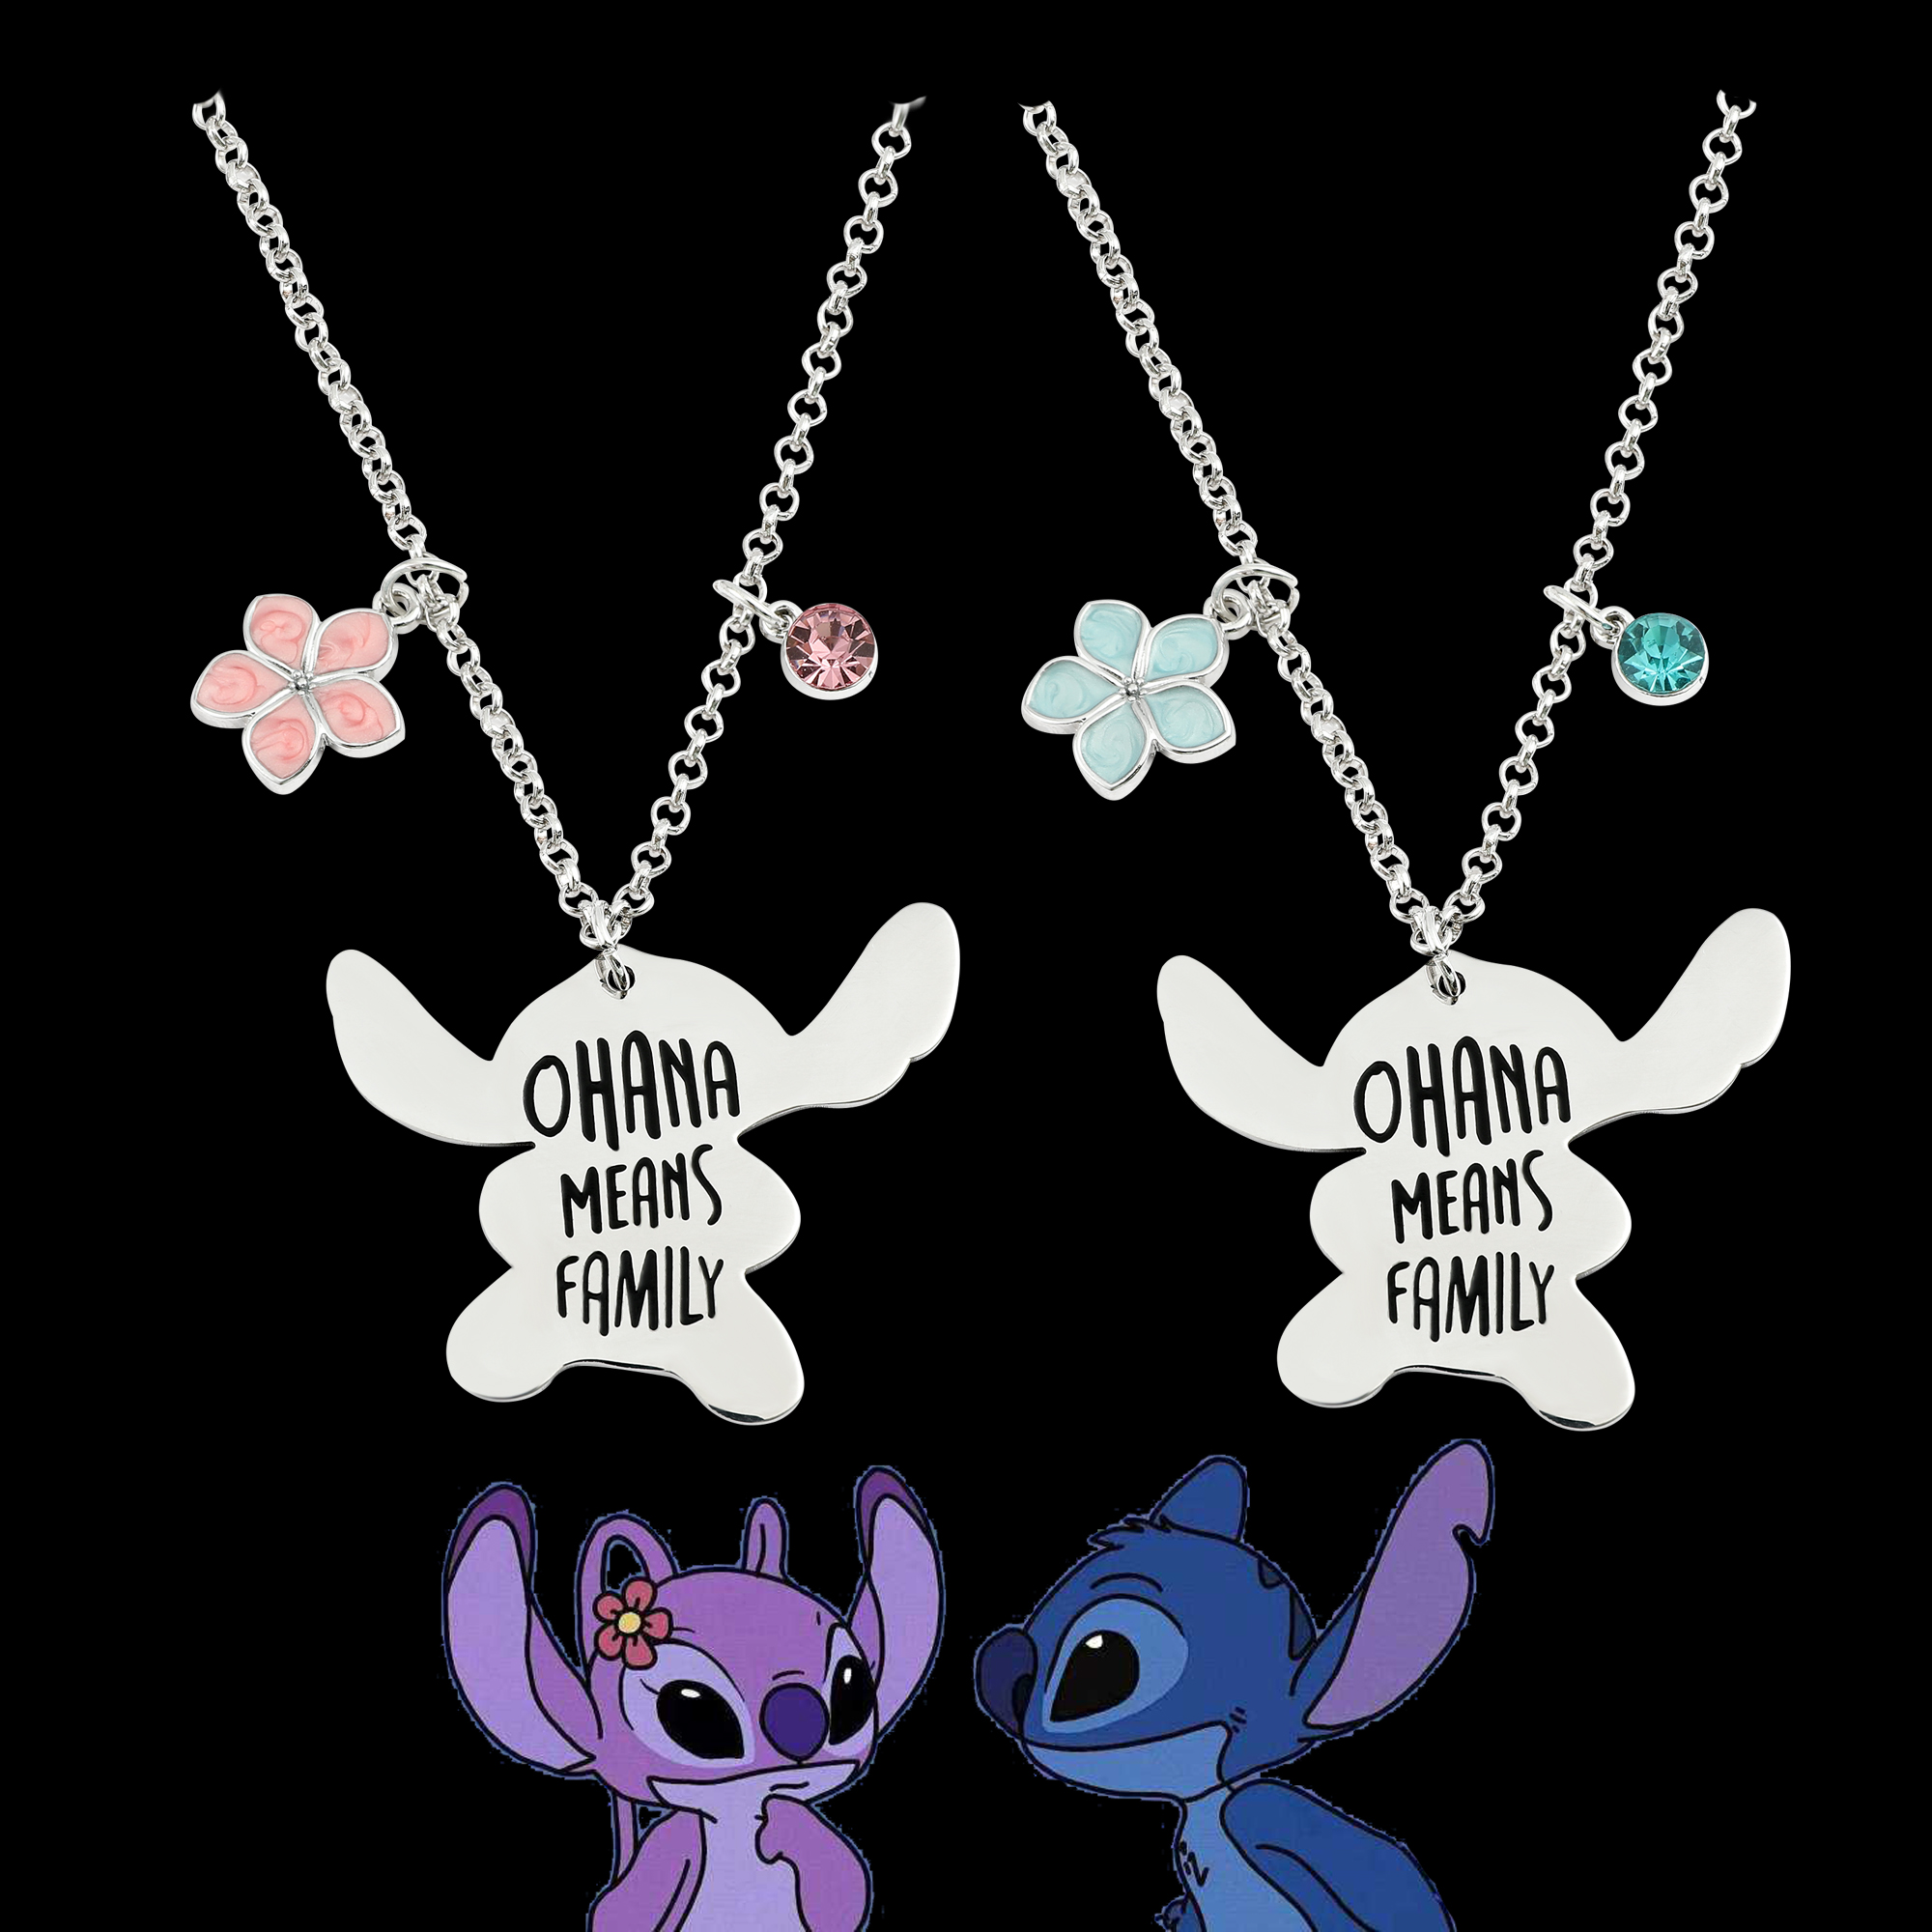 Ohana Means Family Charms Accessories Aesthetic Stainless Steel Jewelry Disney Anime Lilo Necklace Stitch Necklace for Kids